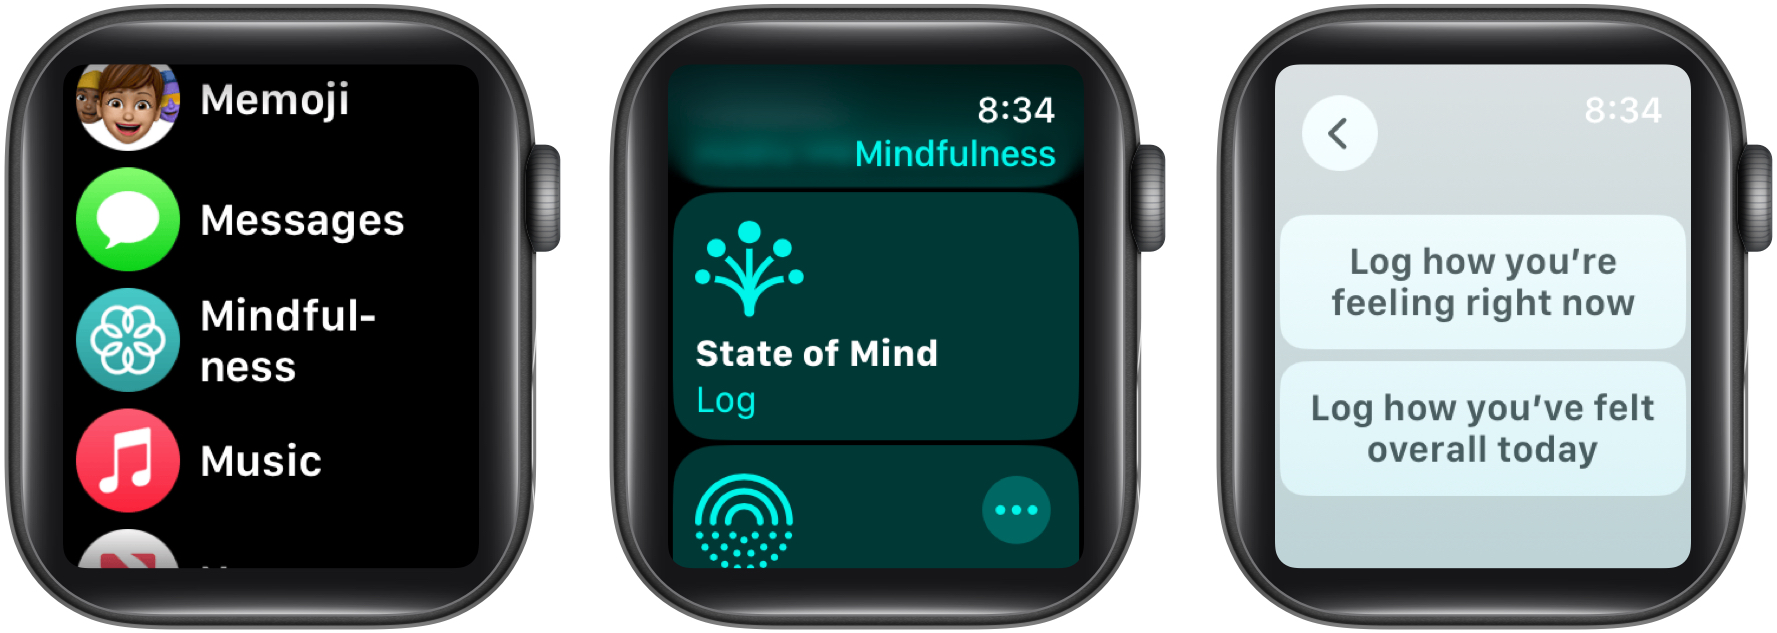 Open Mindfulness app, Select State of Mind, and choose log how you’re feeling right now (emotion) or how you’ve felt overall today (mood)